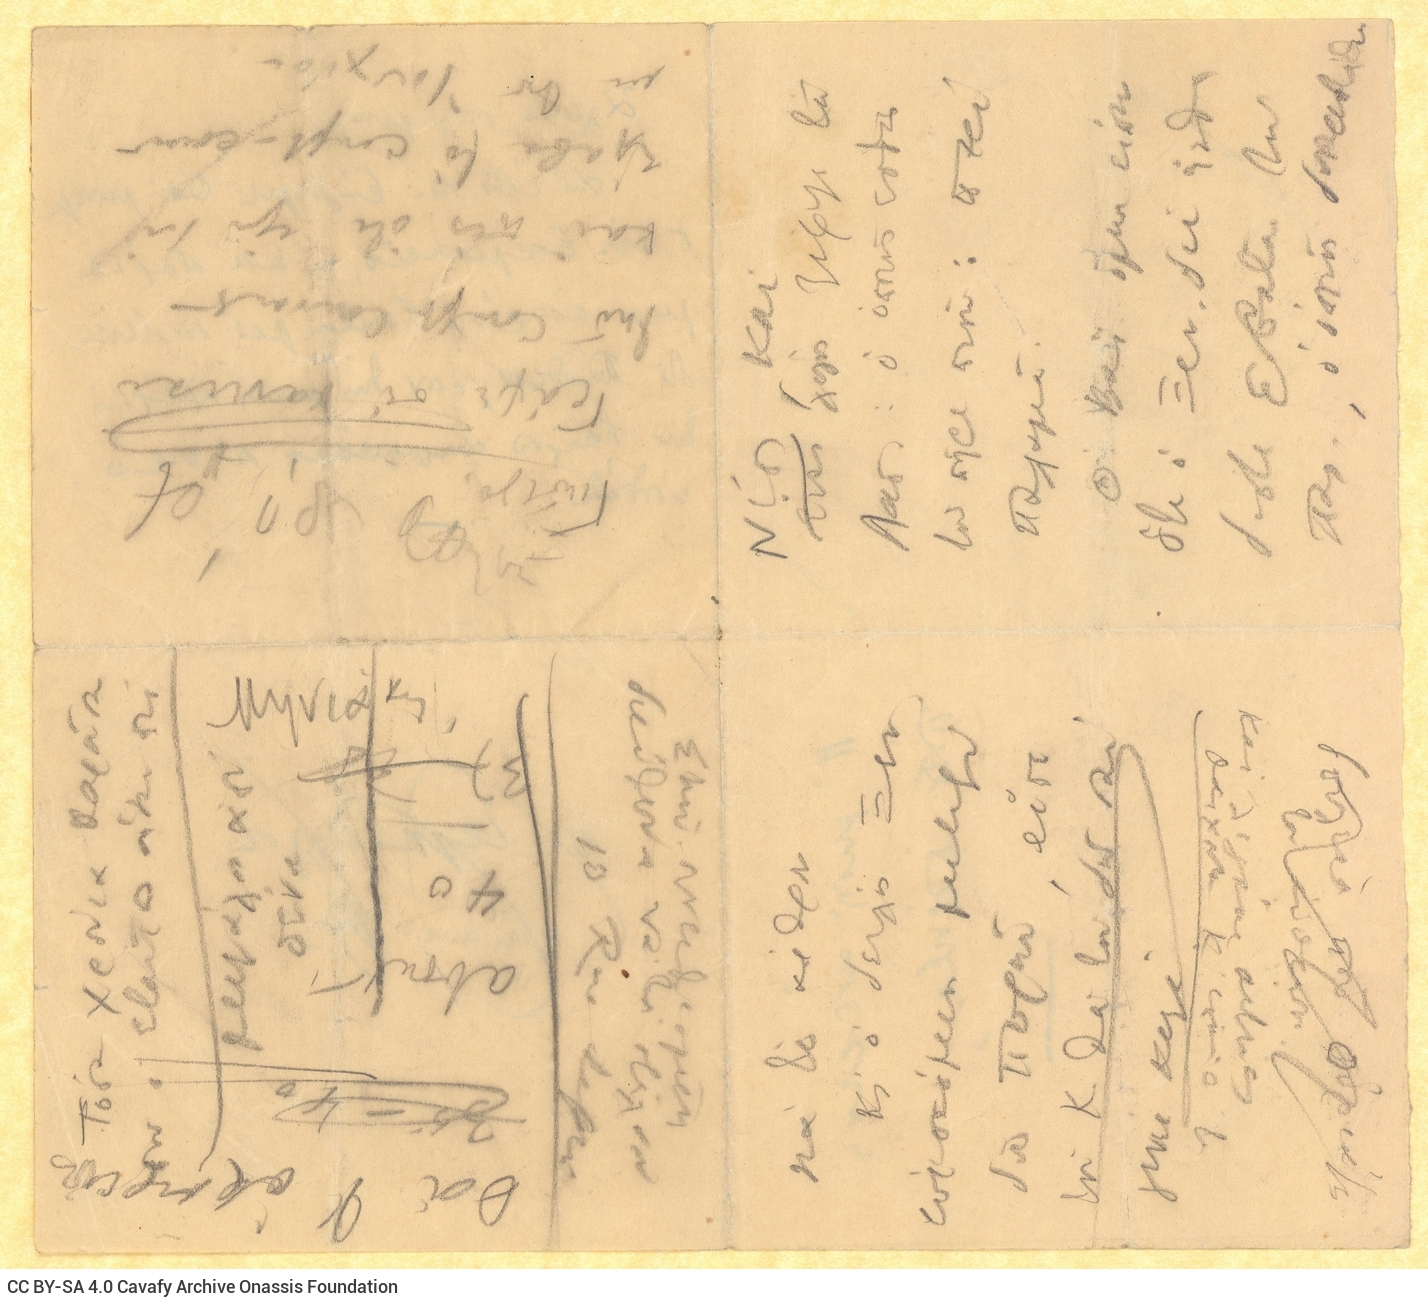 Handwritten notes on both sides of a sheet, regarding various subjects. Cancellations. One of the notes is addressed to Al